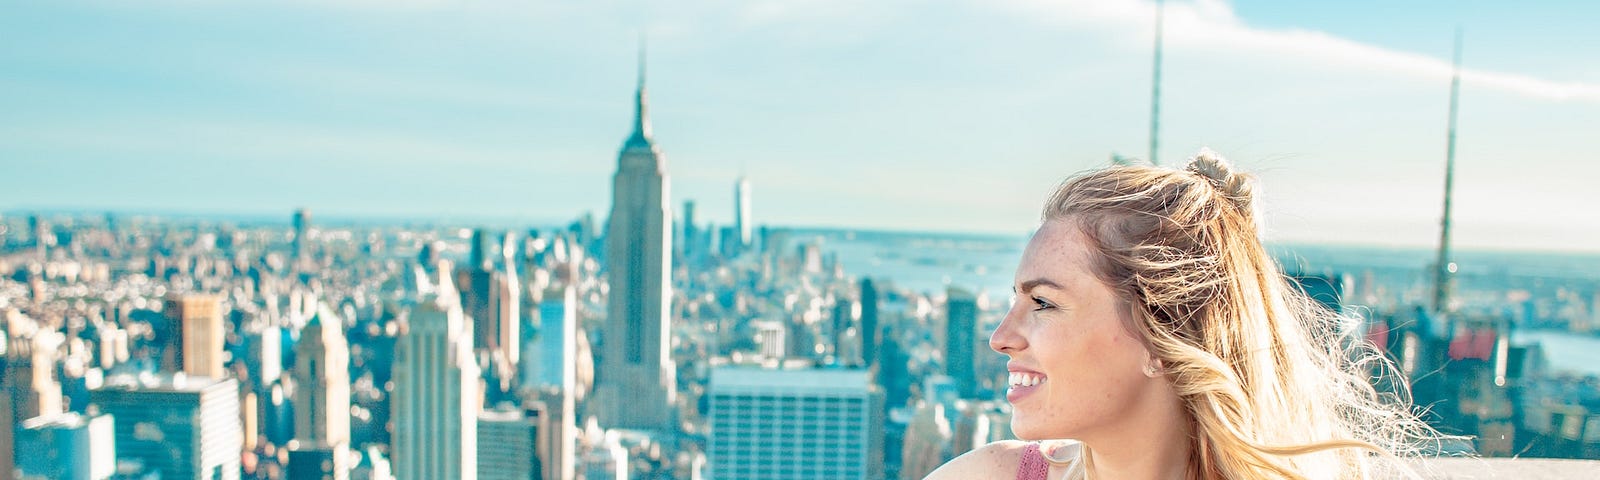 A woman at the top of a building overlooking the New York Skyline